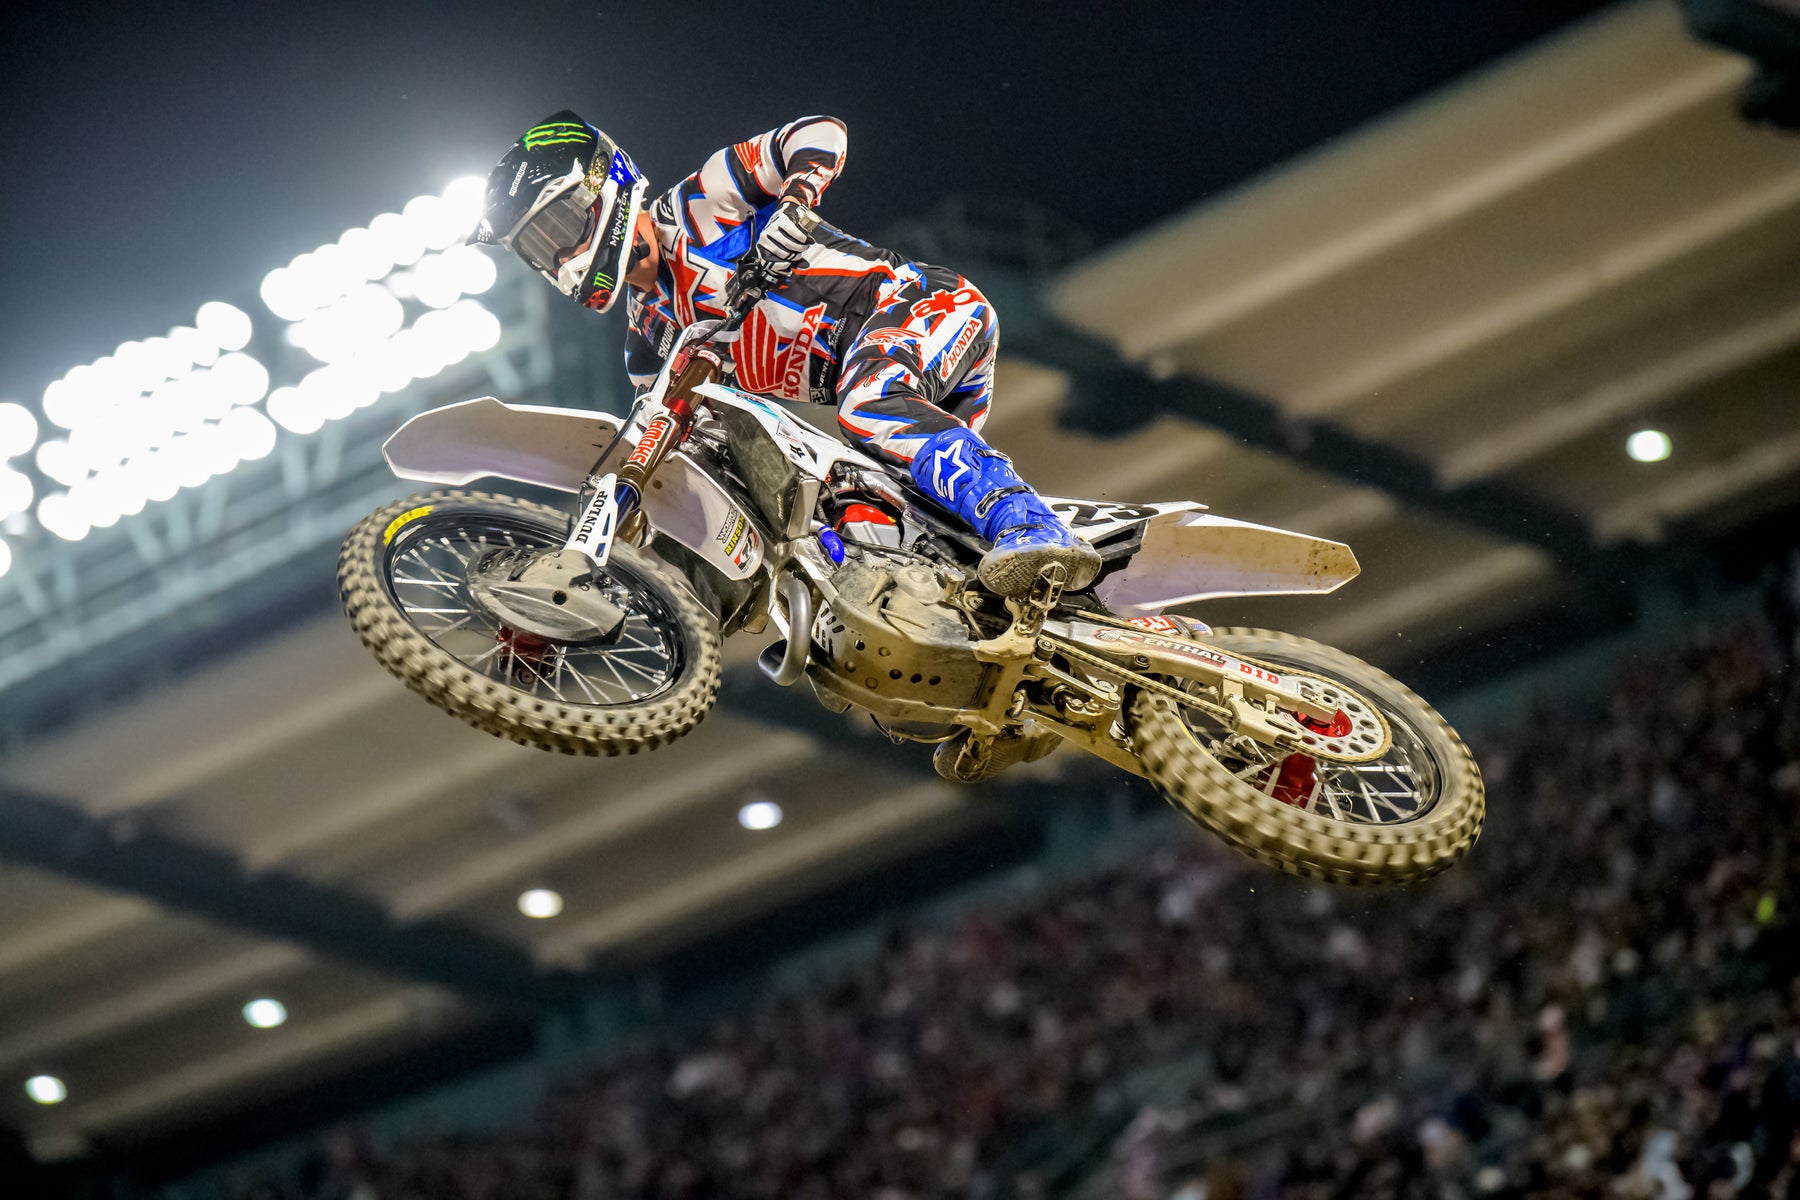 ALPINESTARS 1,2 AS CHASE SEXTON WINS FIRST 450SX TRIPLE CROWN OF THE SEASON AT ANAHEIM 2